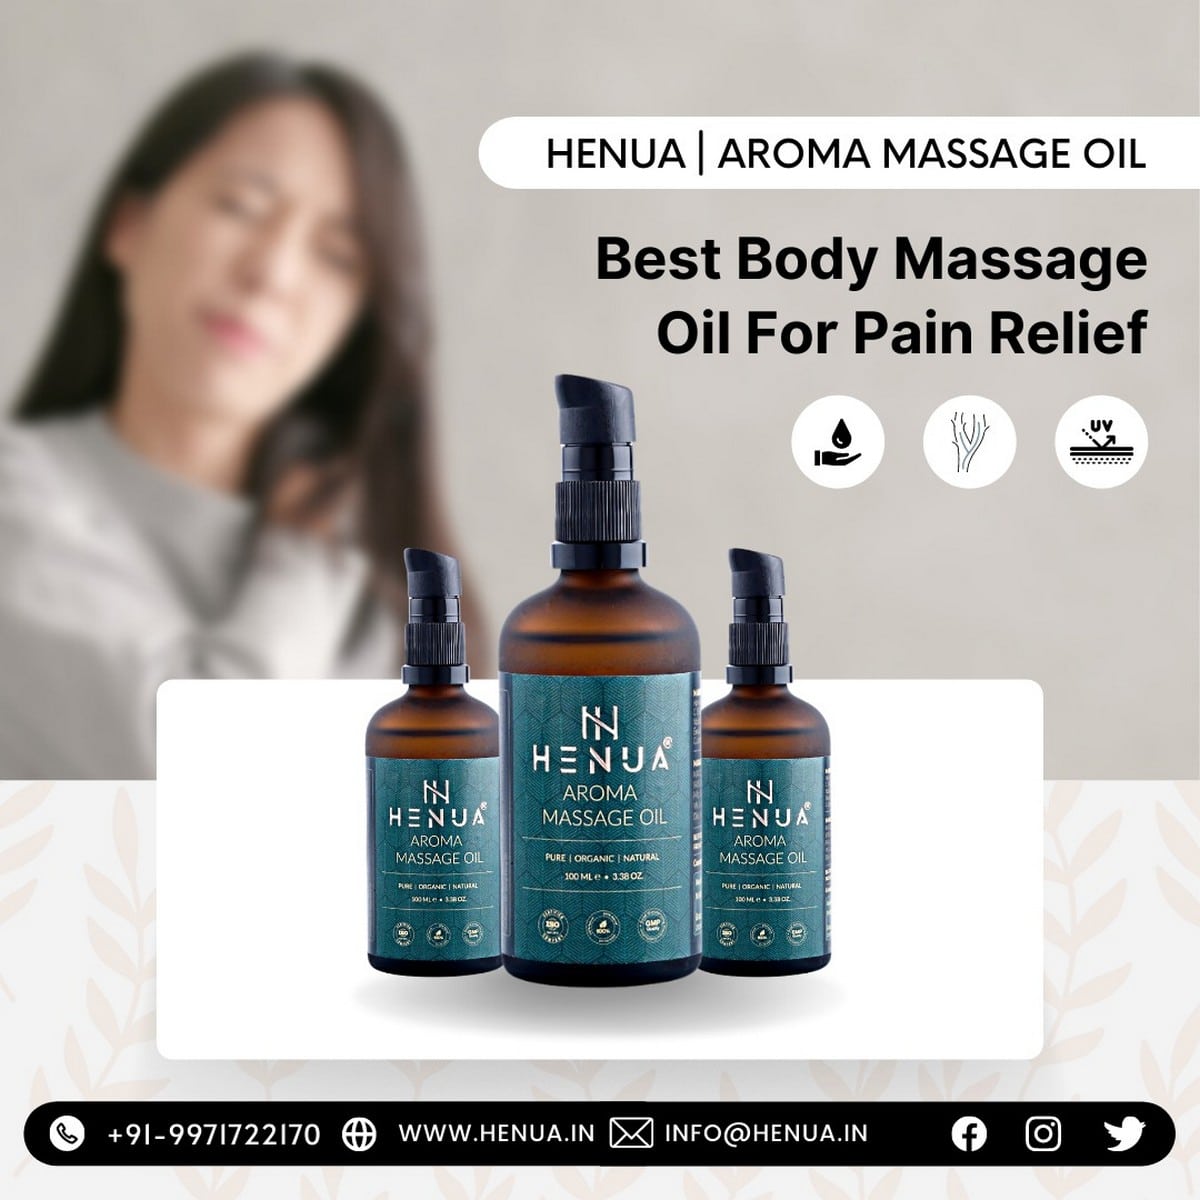 Best Body Massage Oil For Pain Relief